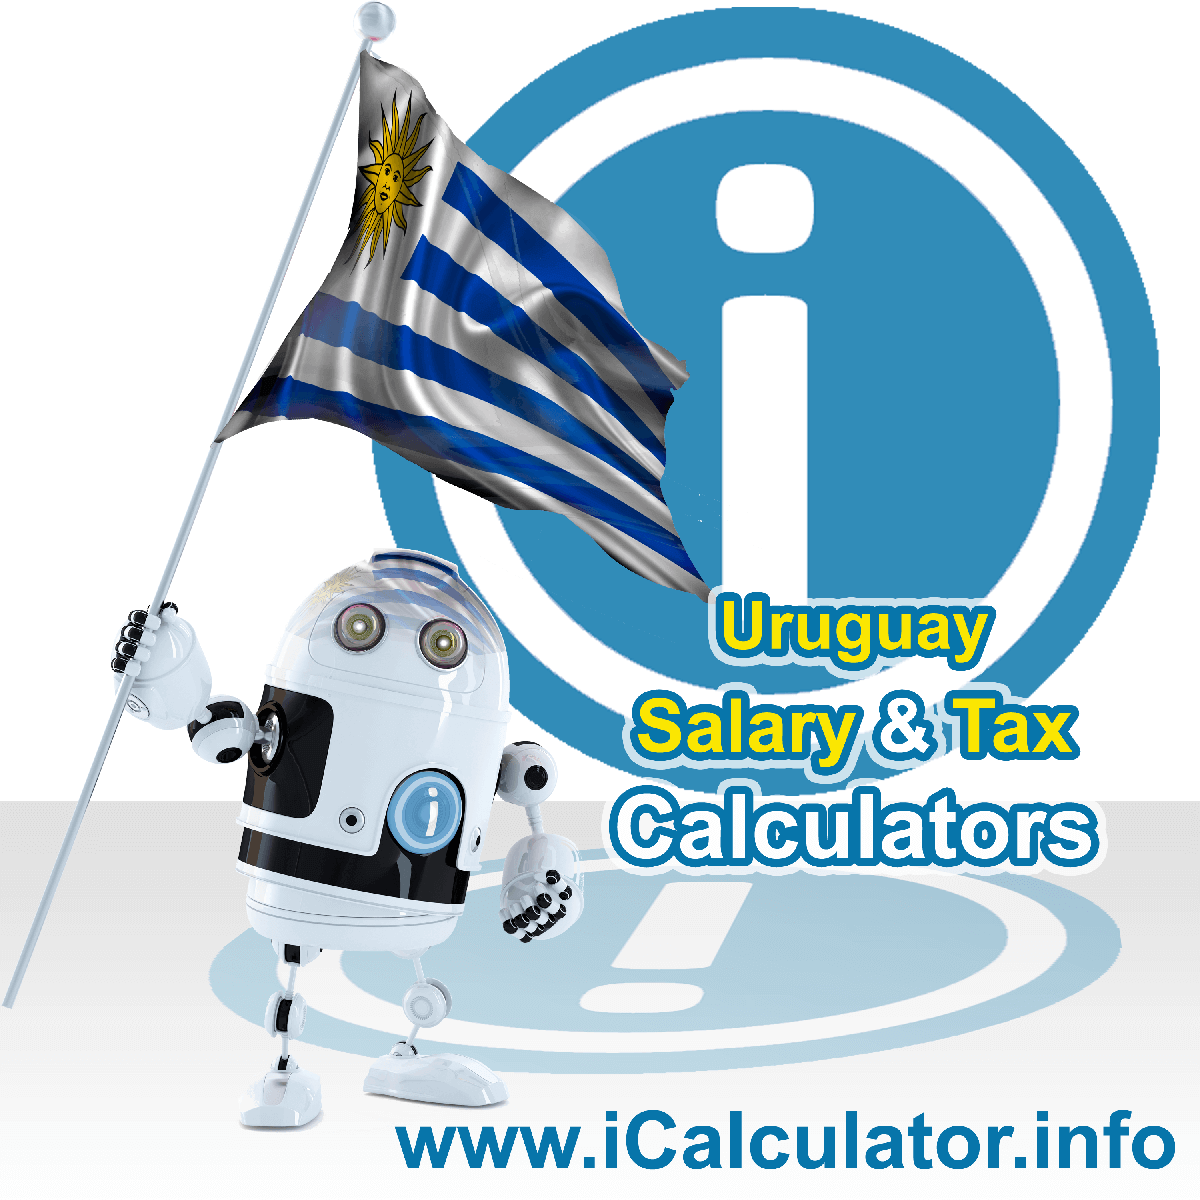 Uruguay Salary Calculator. This image shows the Uruguayese flag and information relating to the tax formula for the Uruguay Tax Calculator